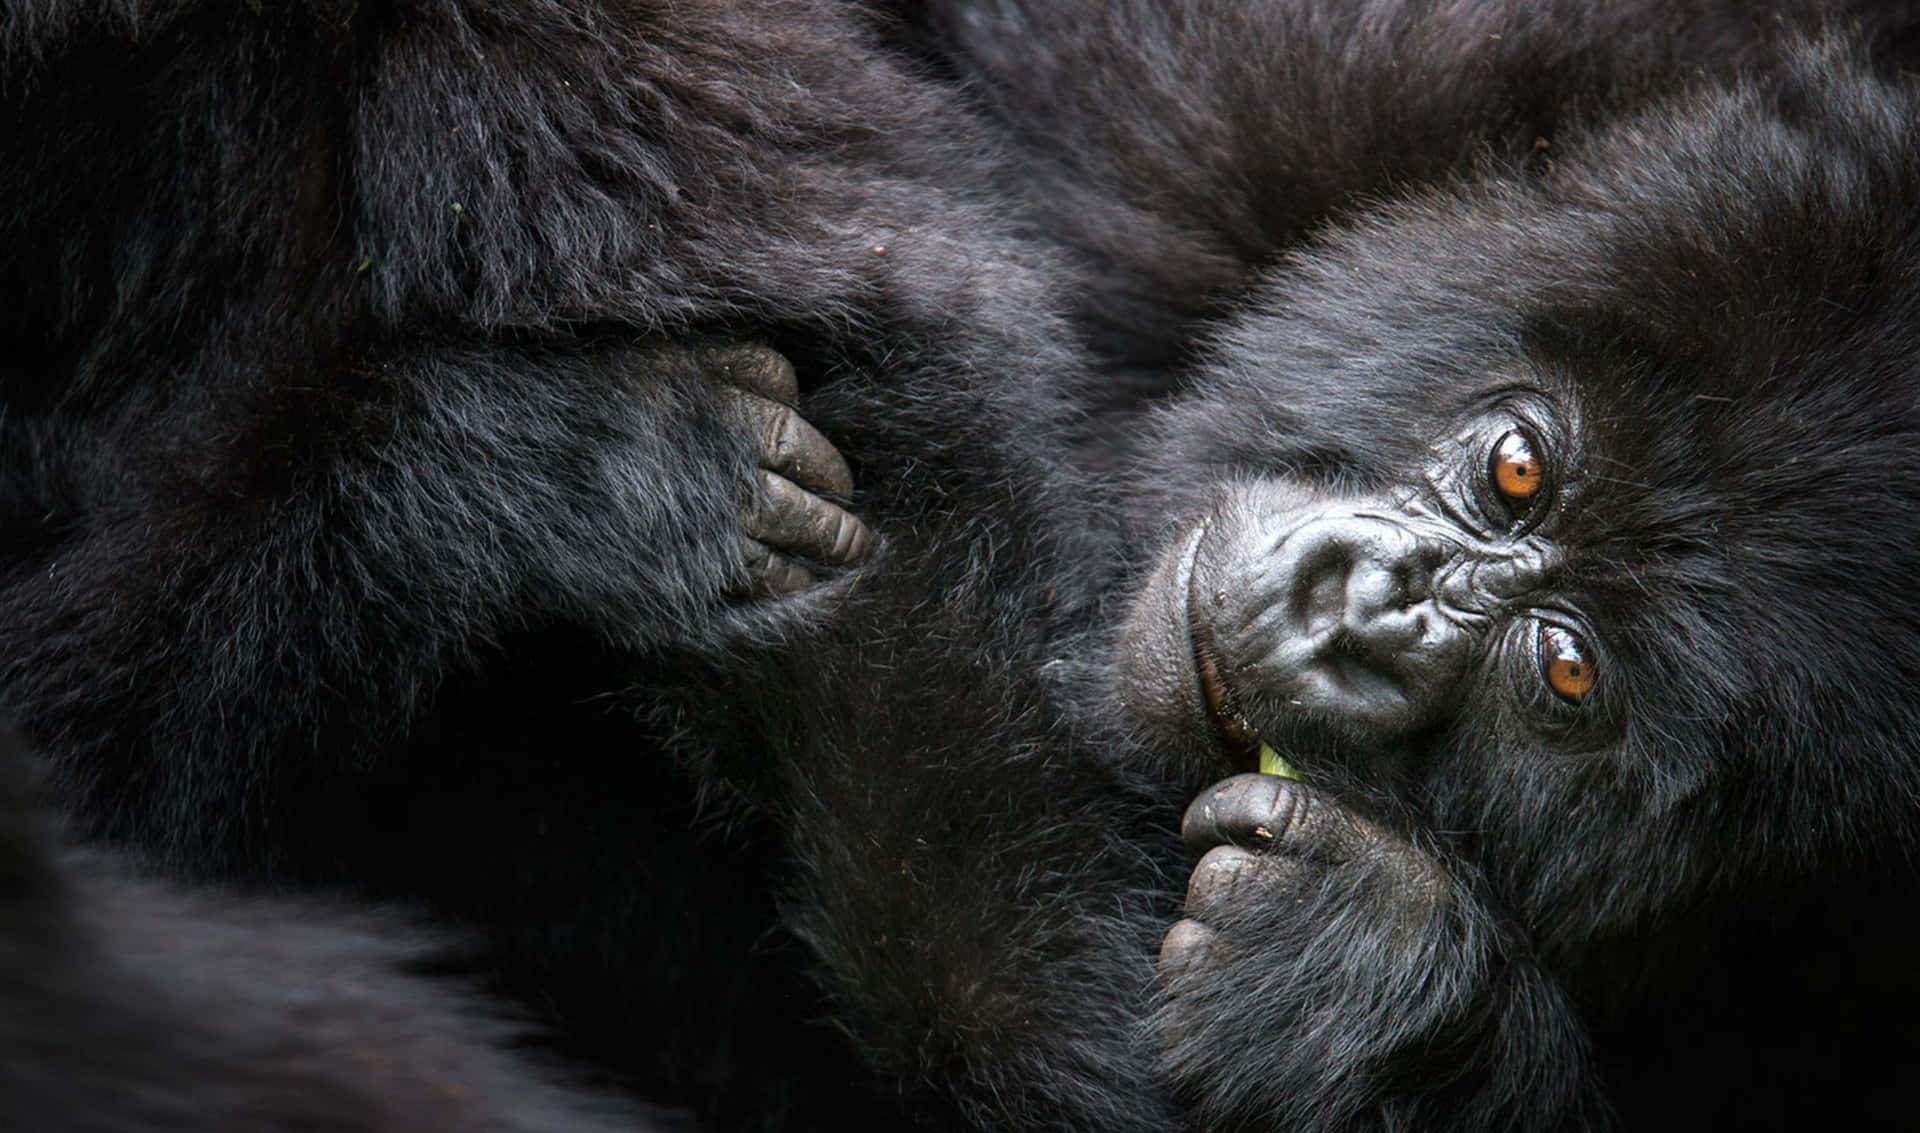 An Intimidating, Yet Endearing, Close-up of a Gorilla